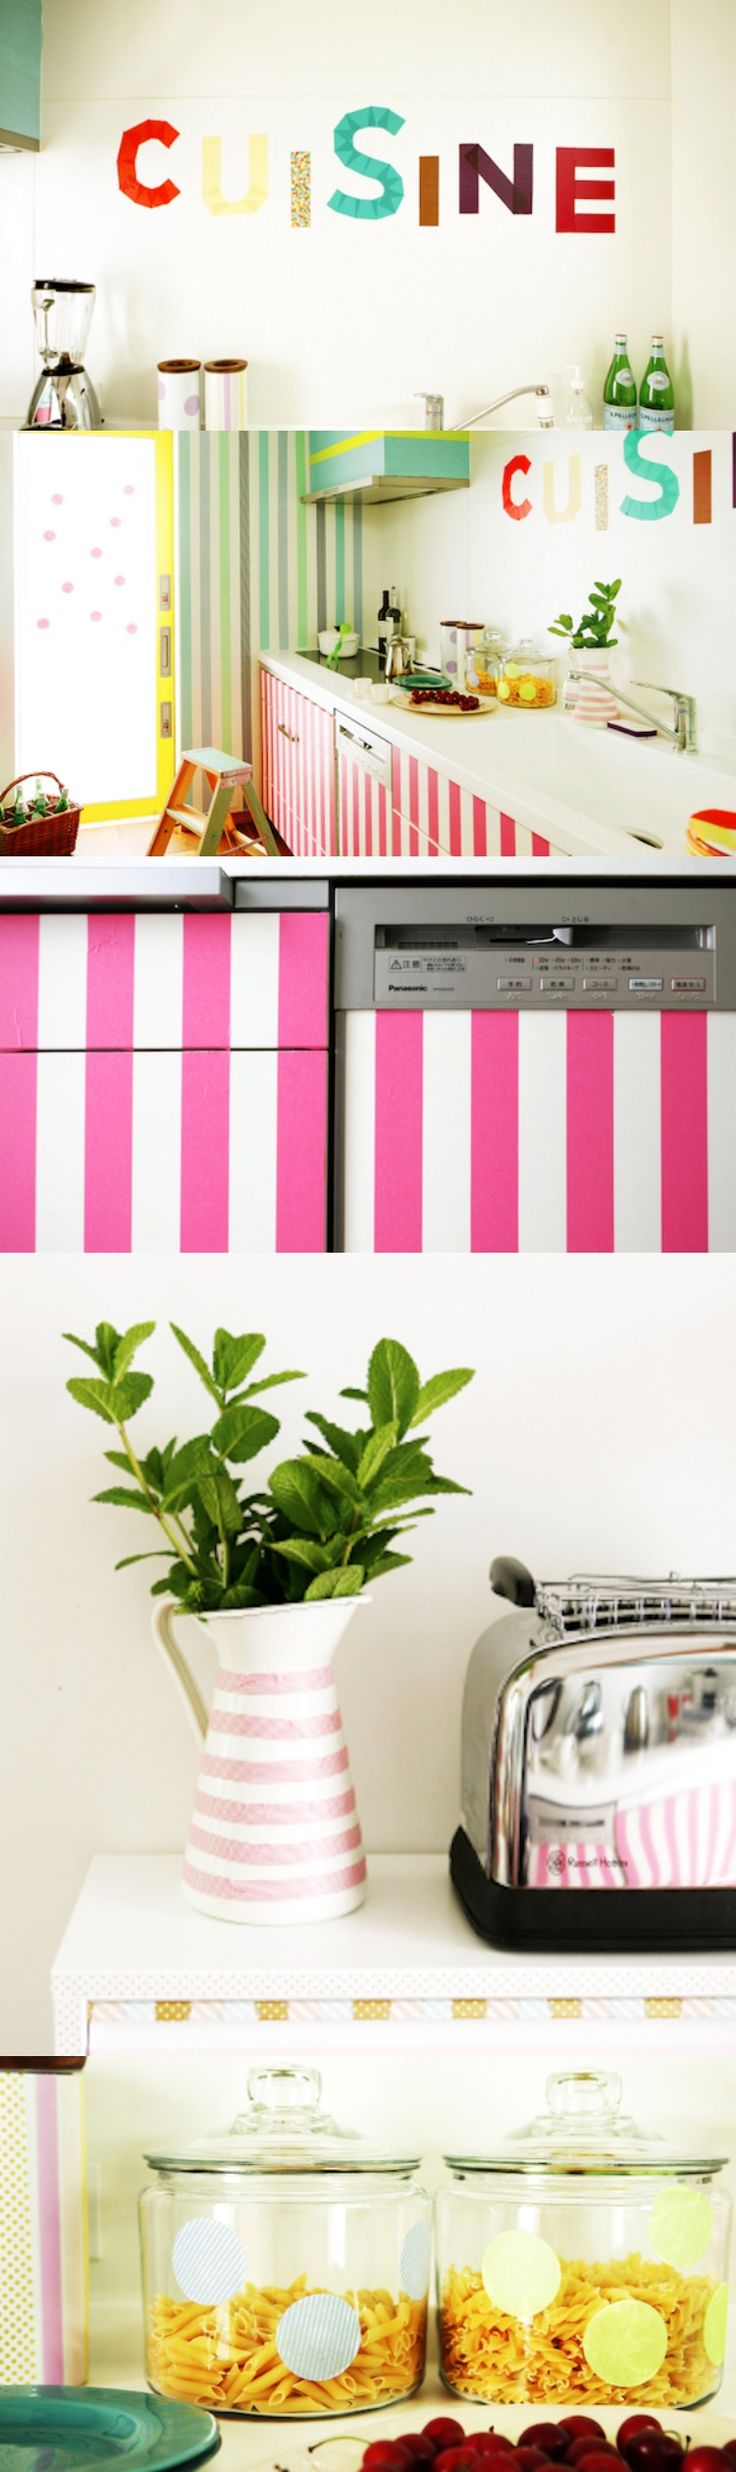 How to washi tape your kitchen - so many great ideas for decorating!